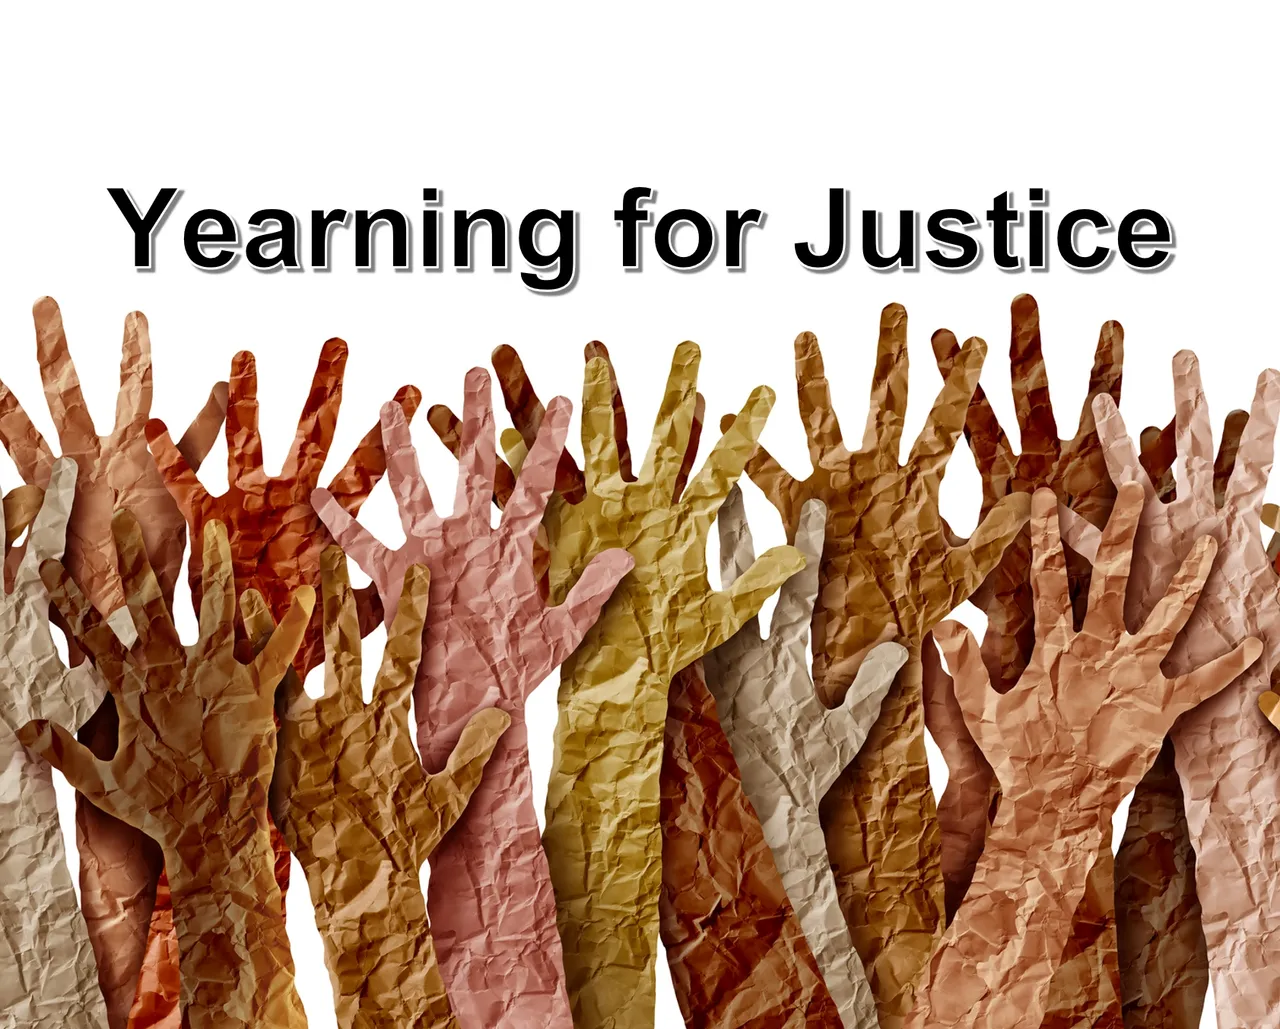 A poster on yearning for justice with paper cut hands